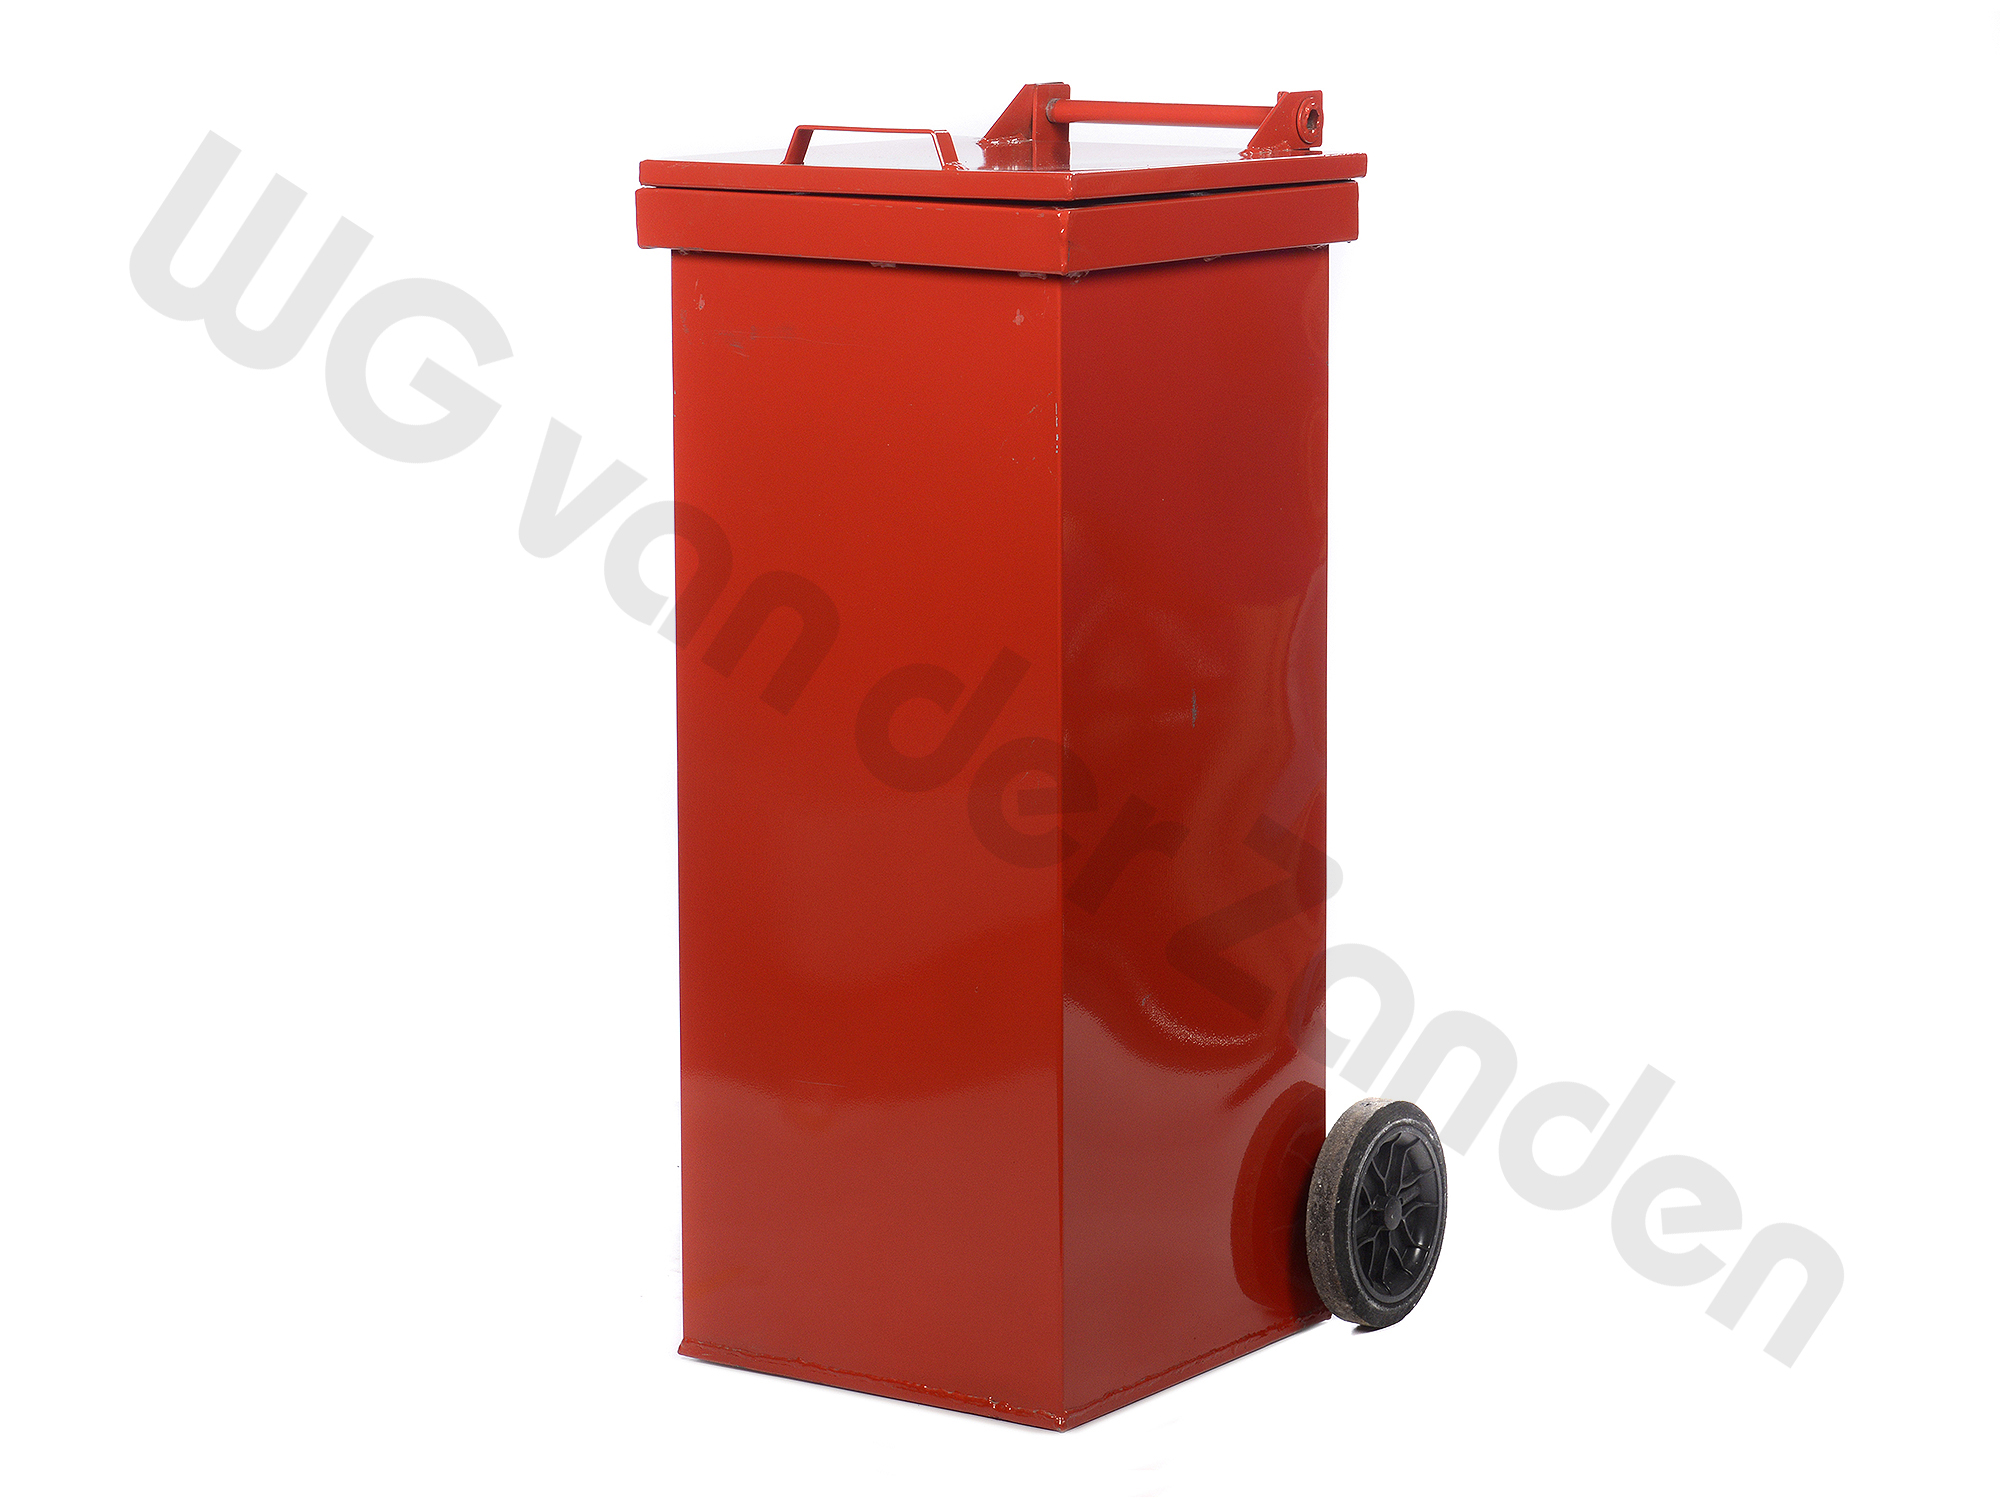 440079 AFVALCONTAINER 240 LTR METAAL M/WIEL ROOD